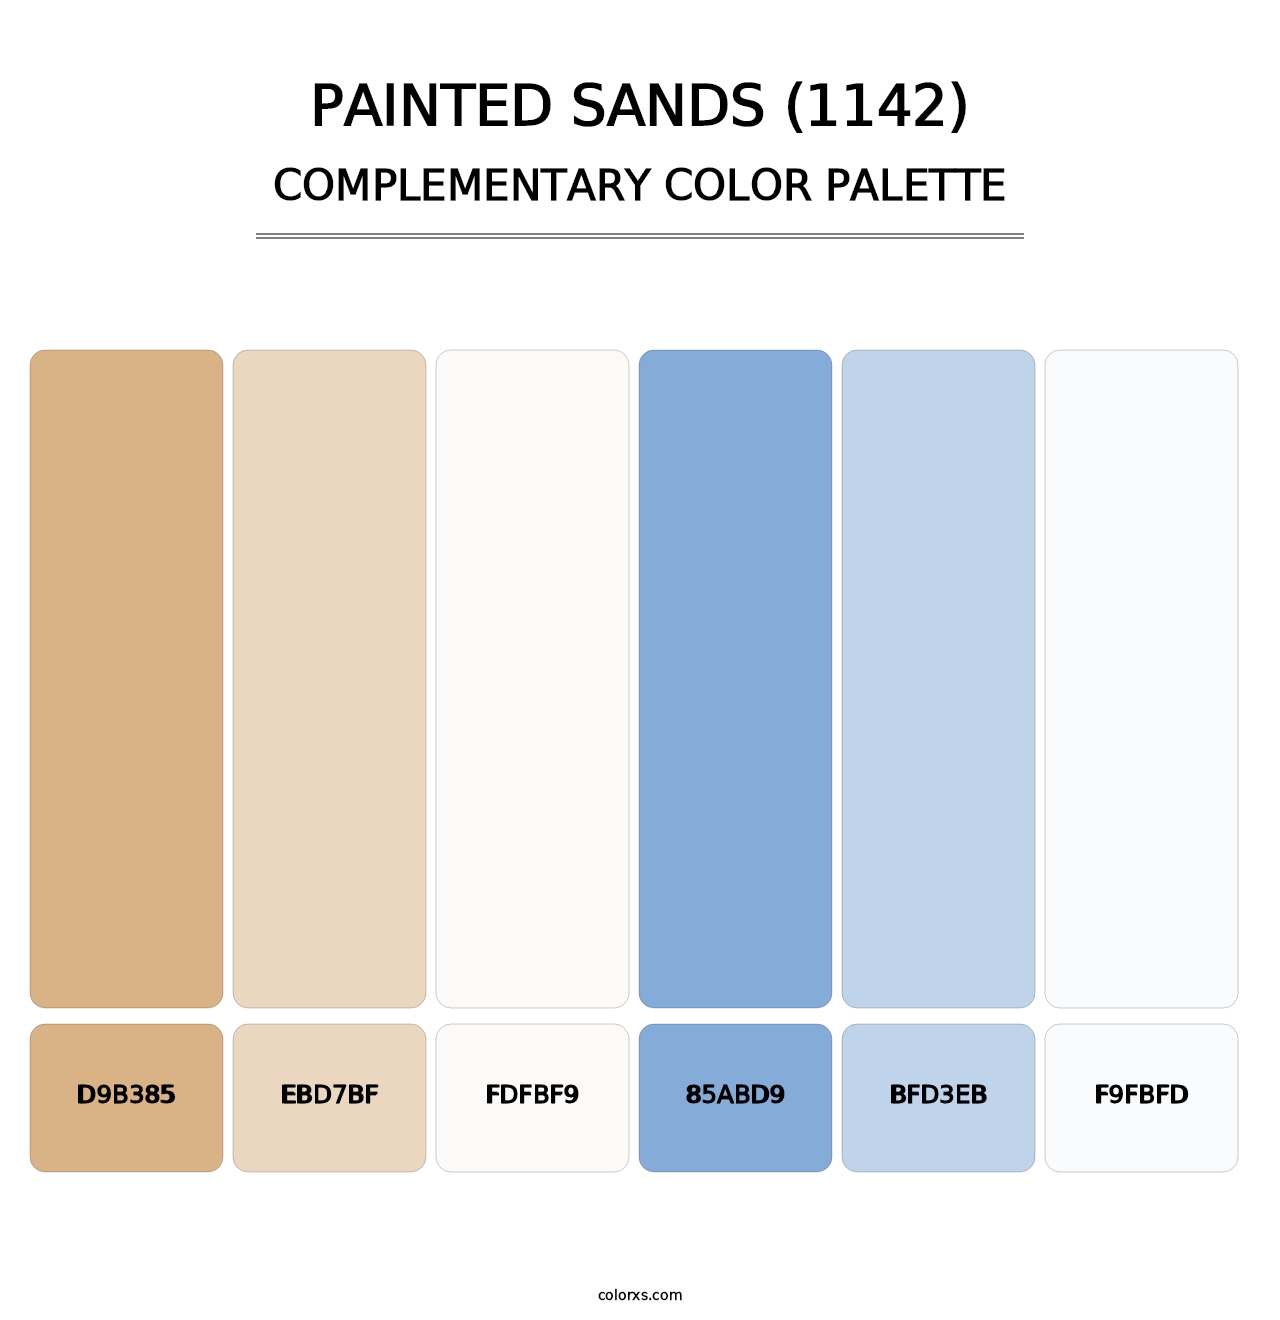 Painted Sands (1142) - Complementary Color Palette